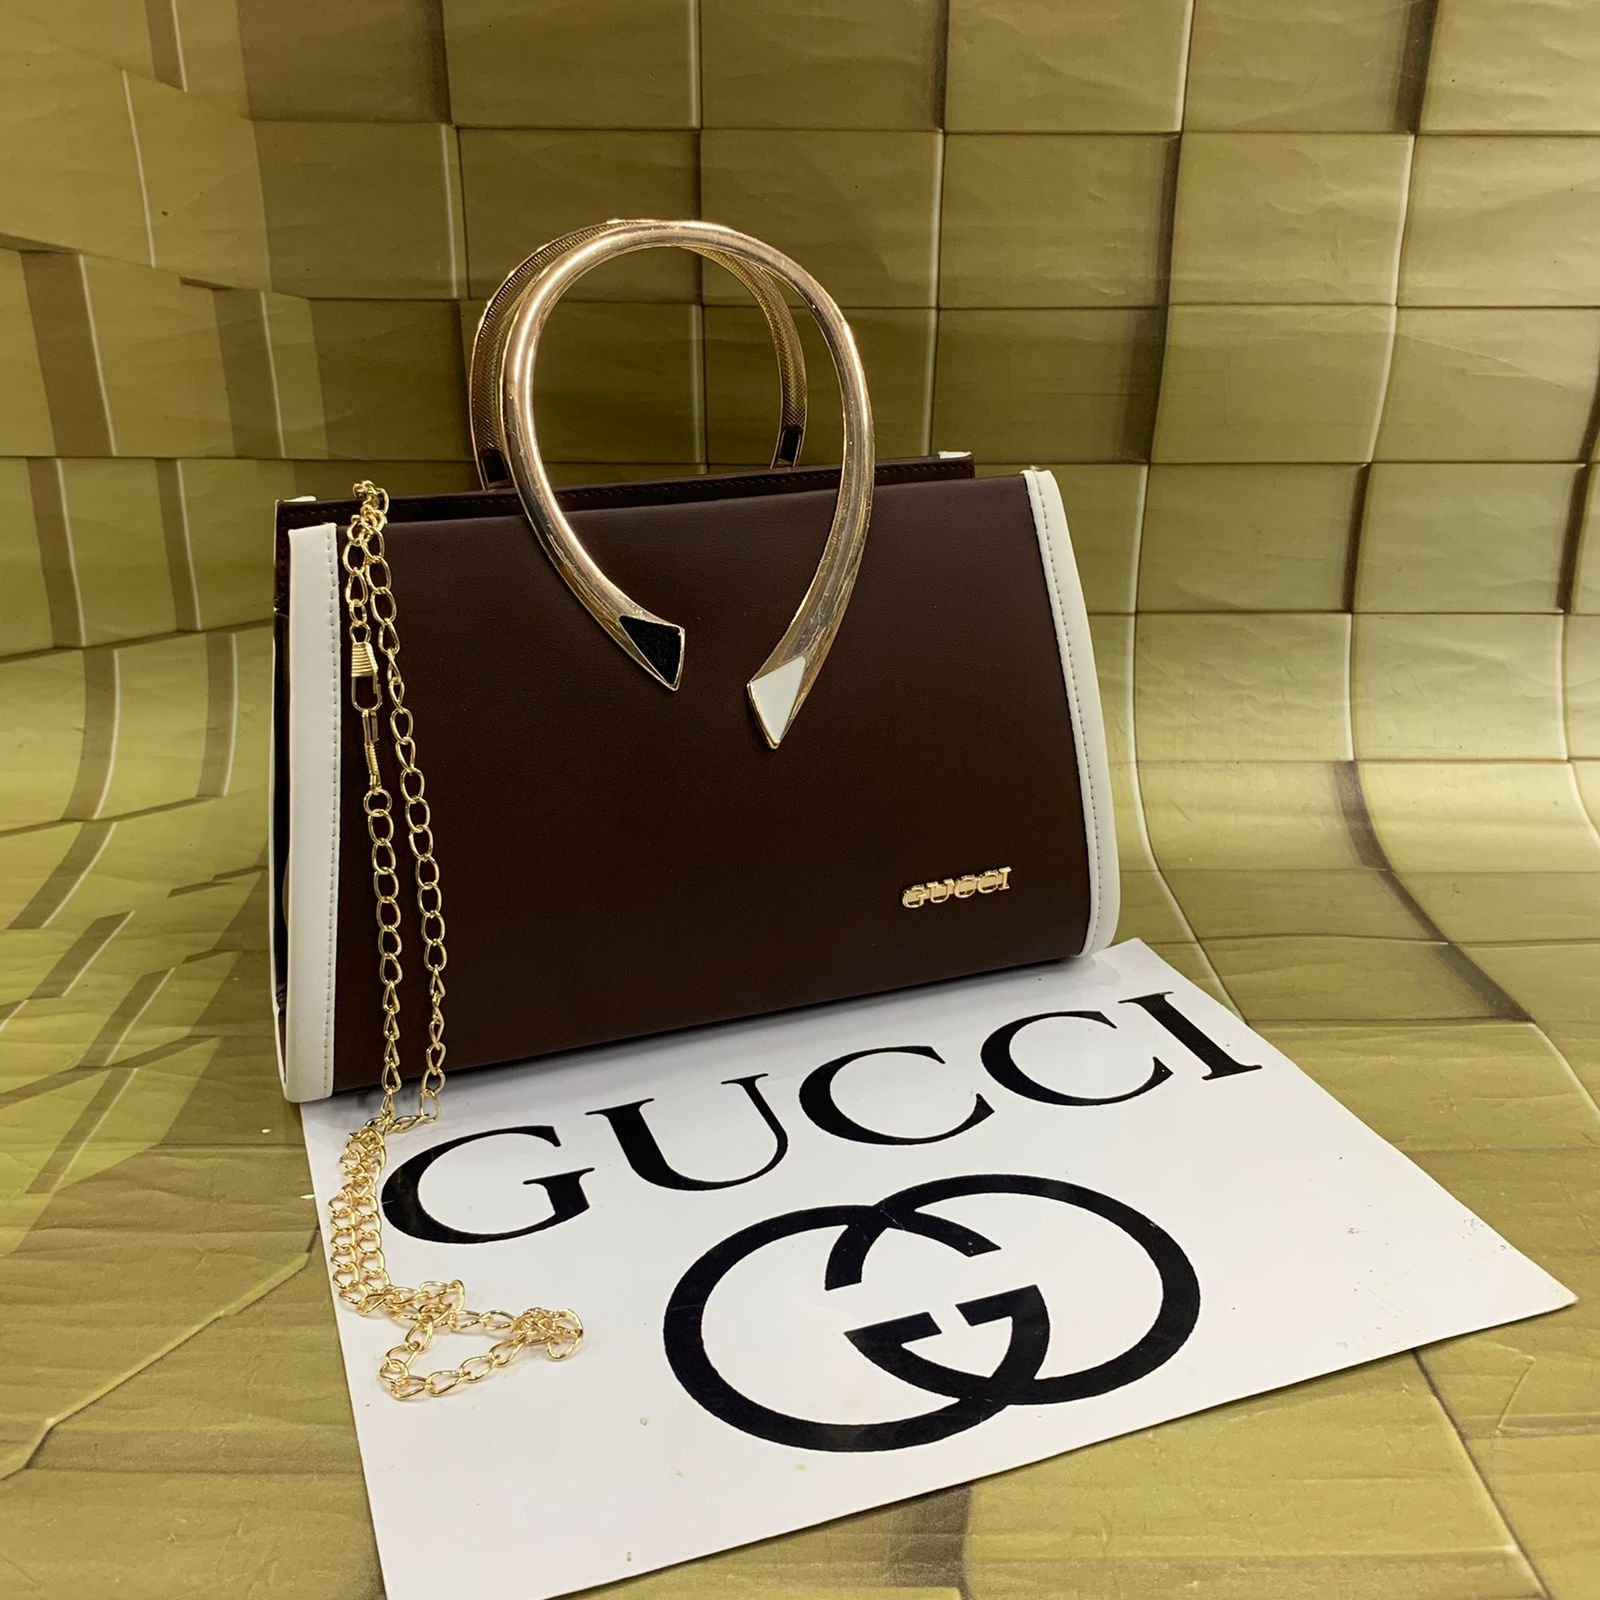 How much does a Gucci purse cost? - Quora